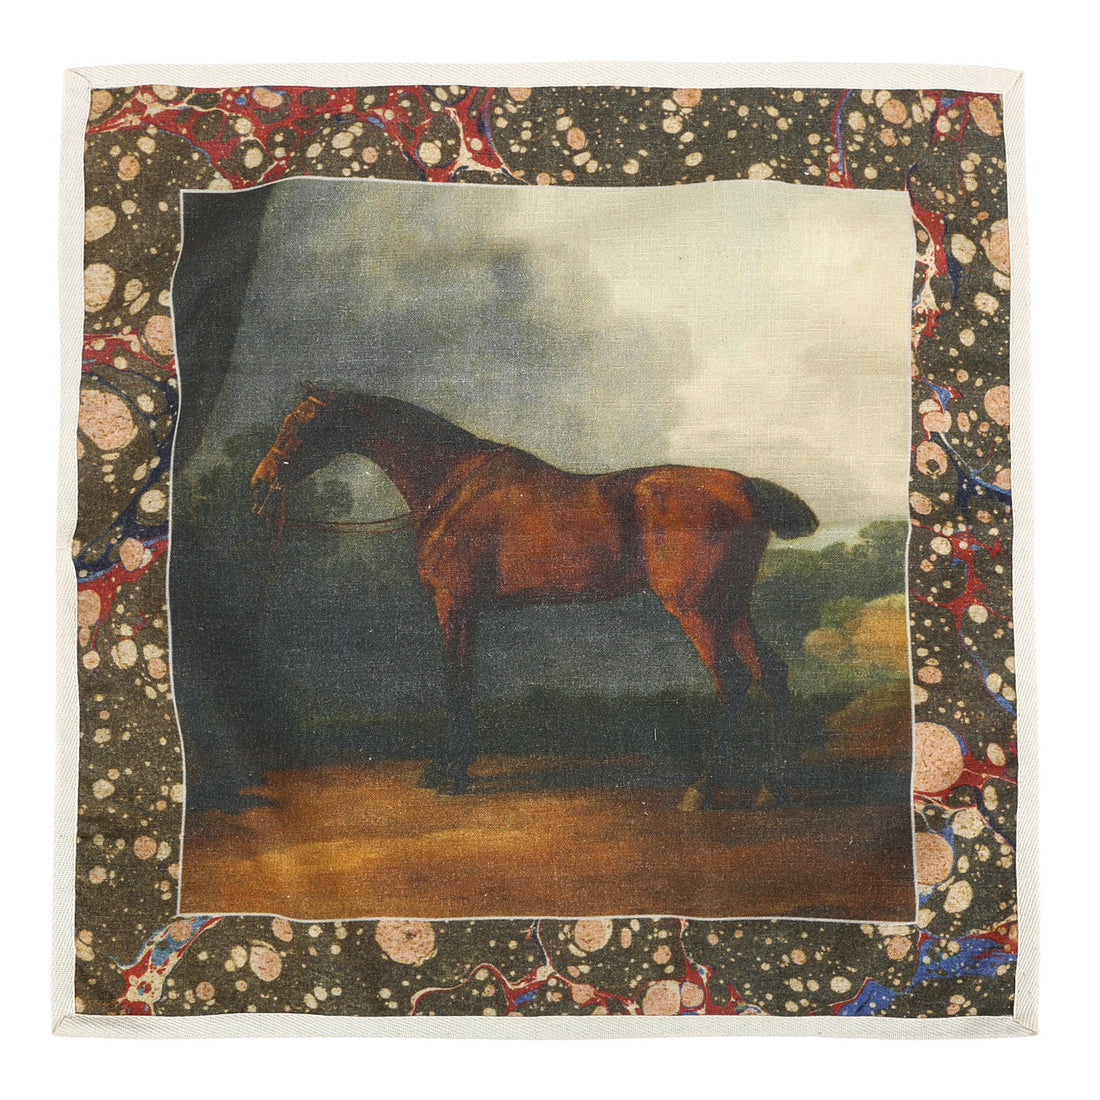 A vintage painting of a brown horse on a Hunt Dinner Napkins, Set of 4 handkerchief with a decorative border by Siren Song.